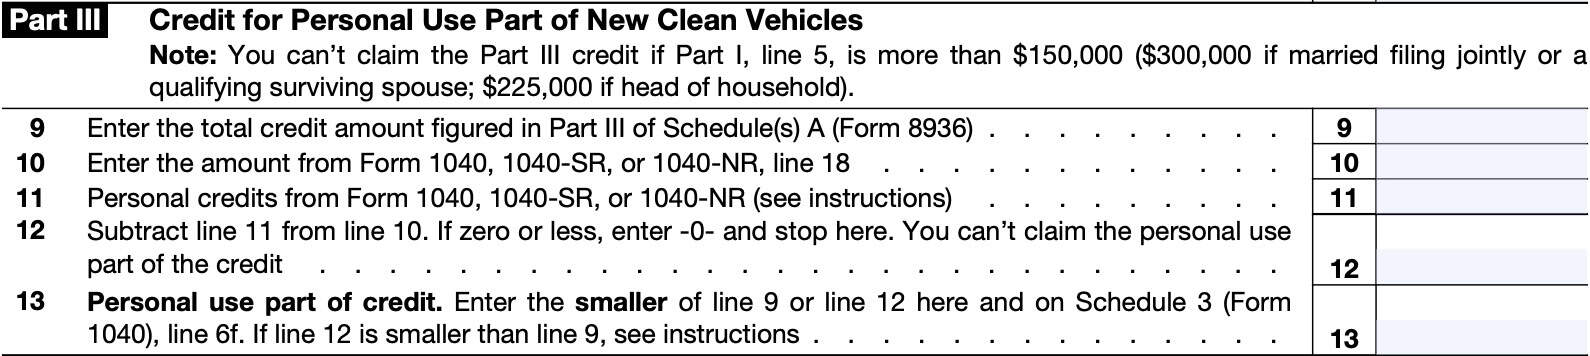 irs form 8936 part iii: credit for personal use part of new clean vehicles